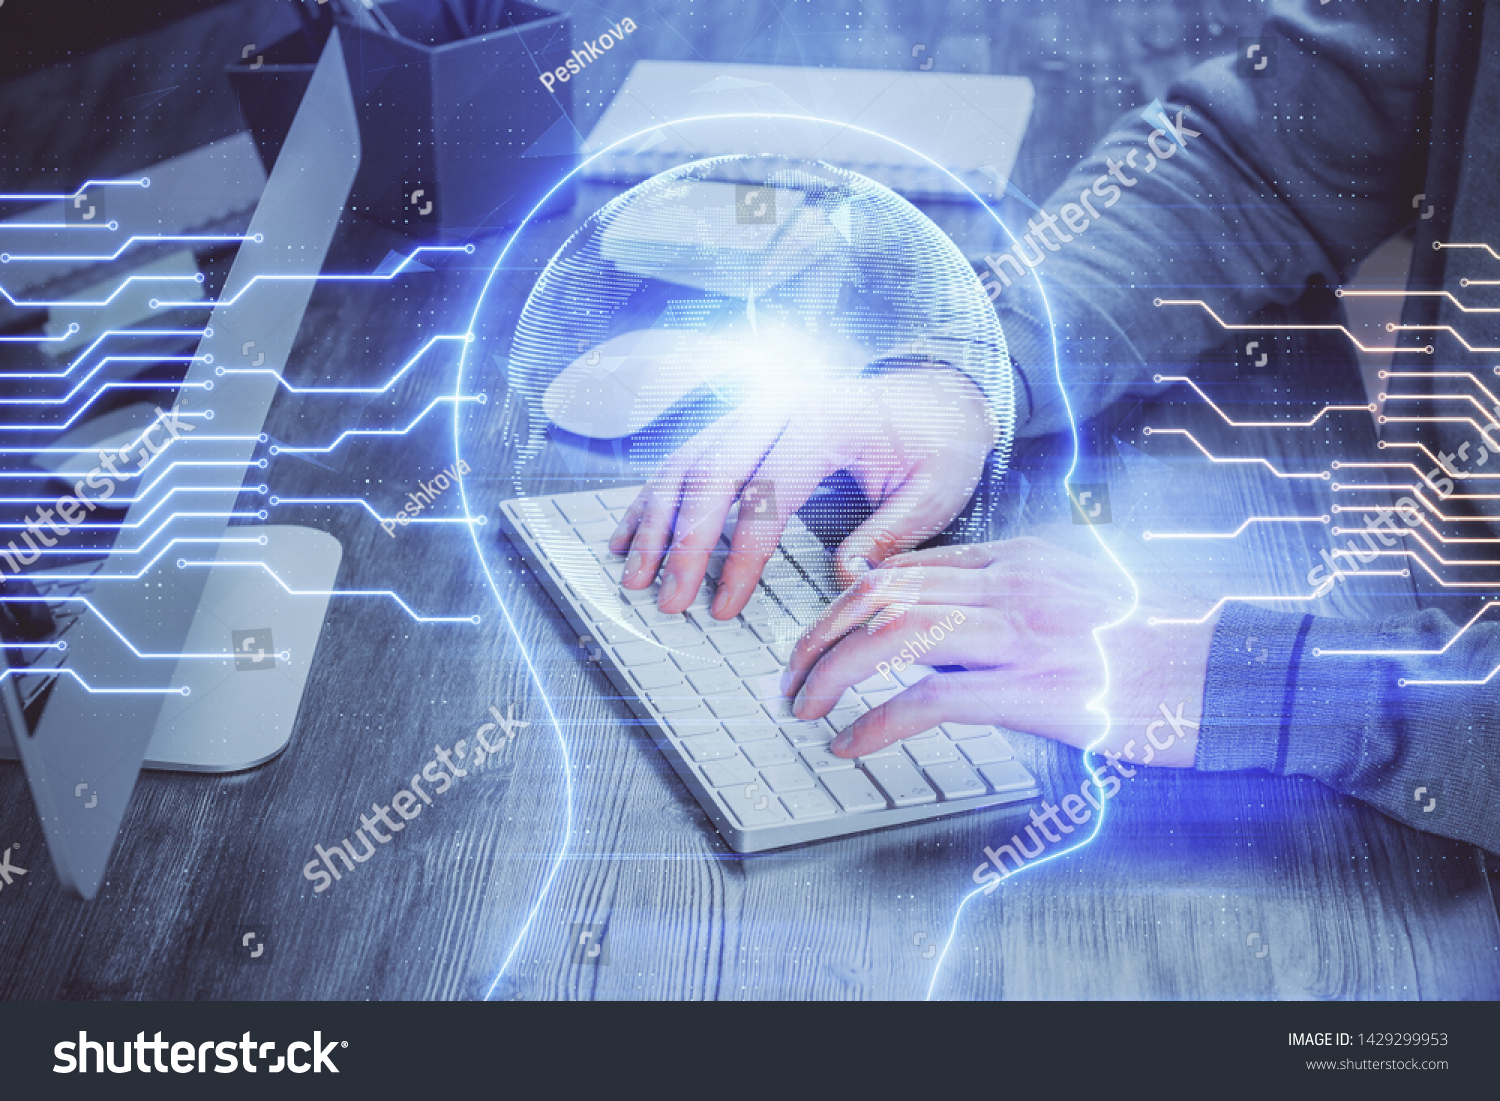 Man with computer background with brain theme hologram. Concept of brainstorm. Double exposure. #1429299953